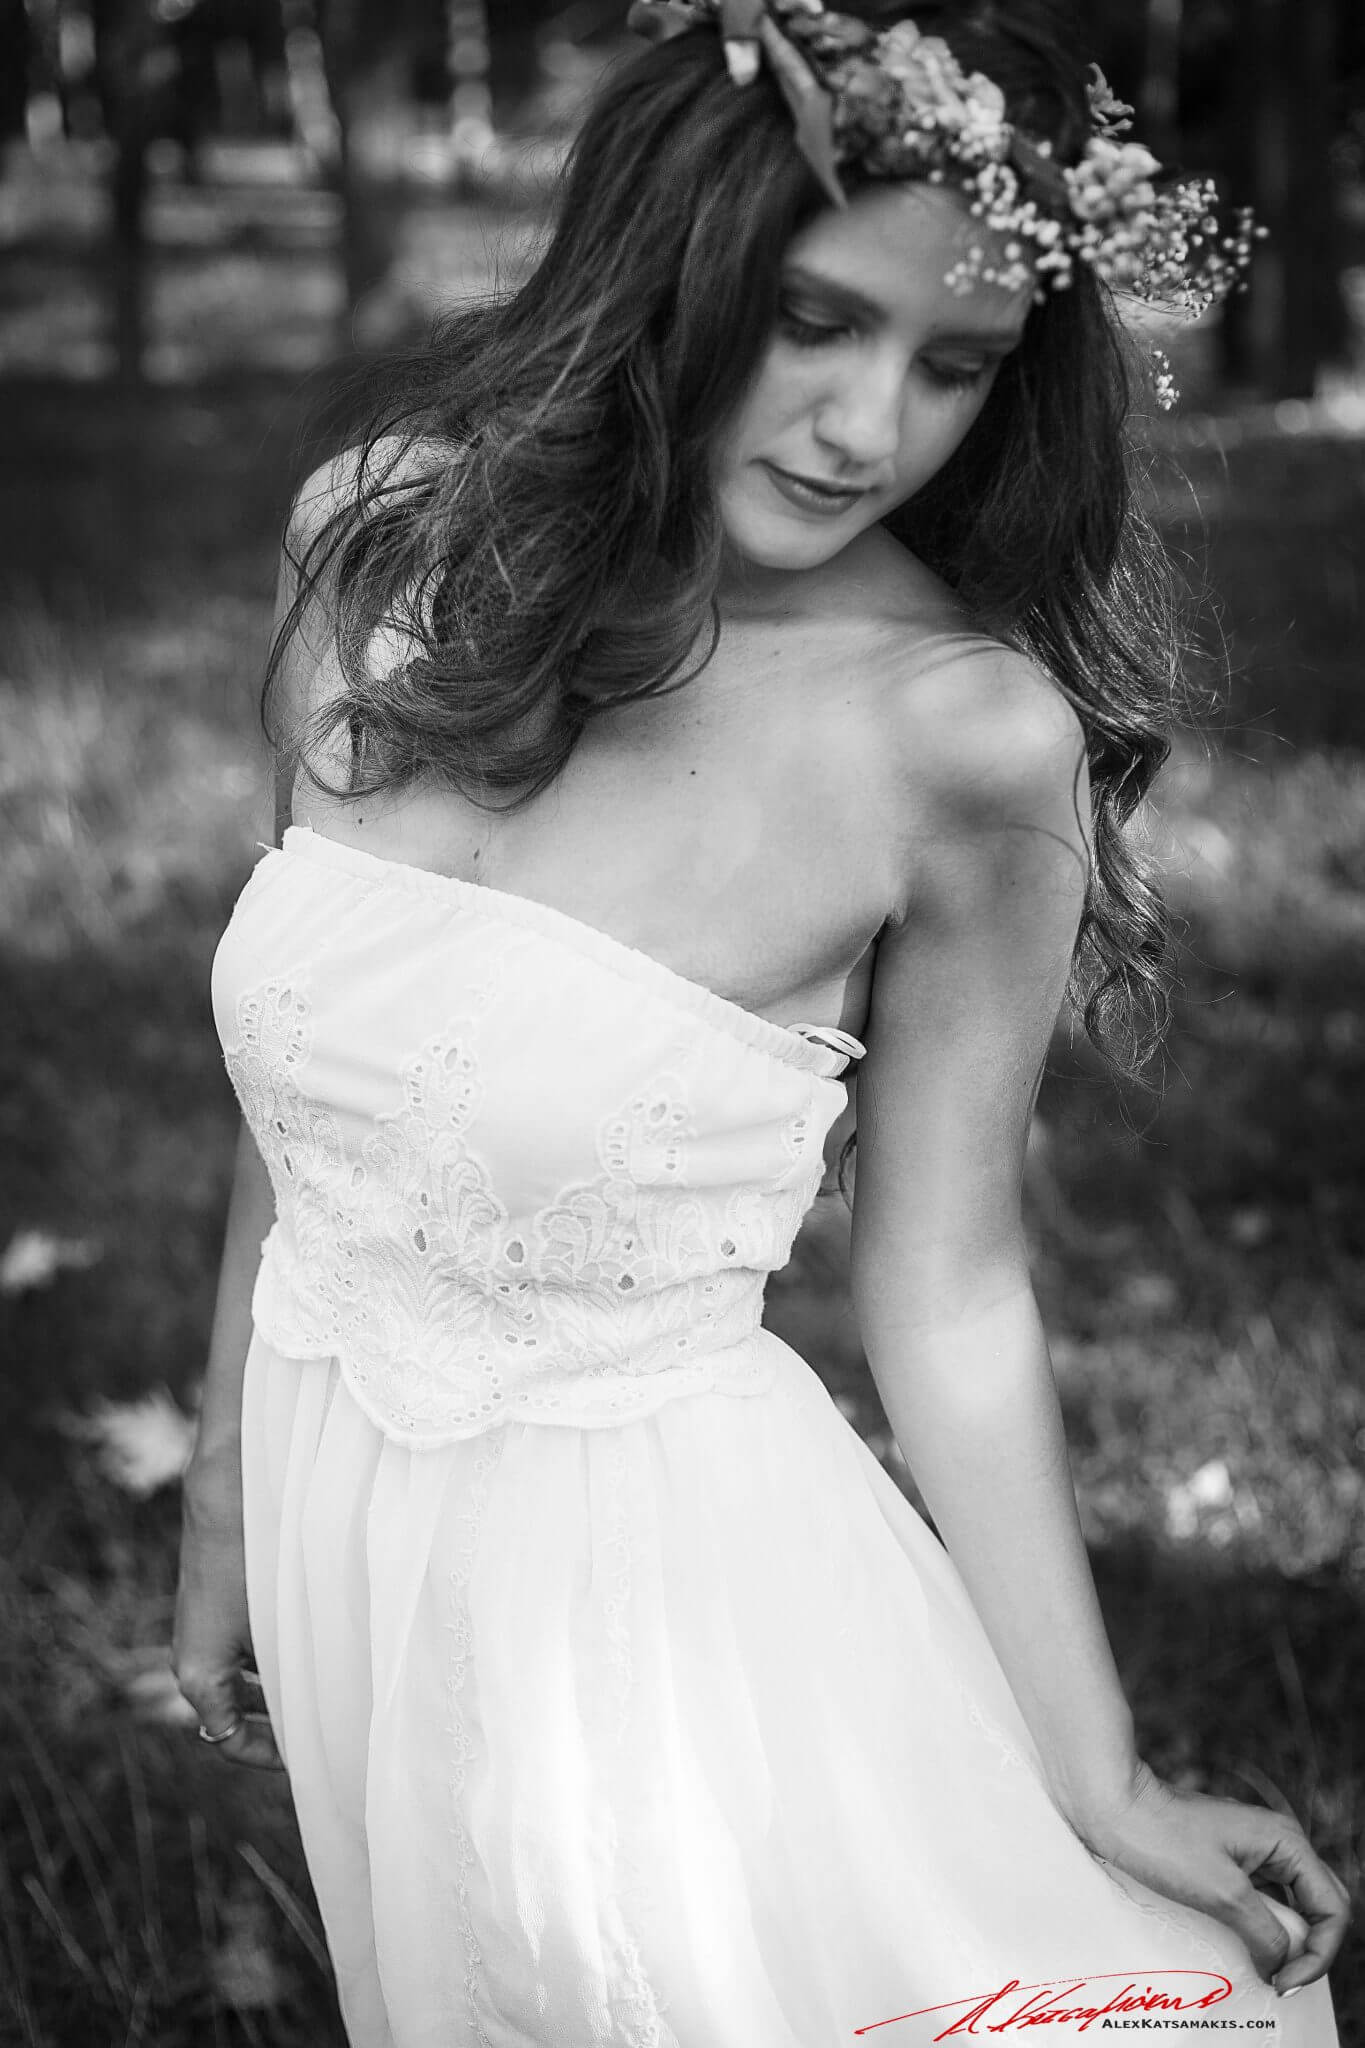 Wedding Bridal Photo Shoot in Serres, Greece by the Dreammakers. Wedding Photography and Videography.